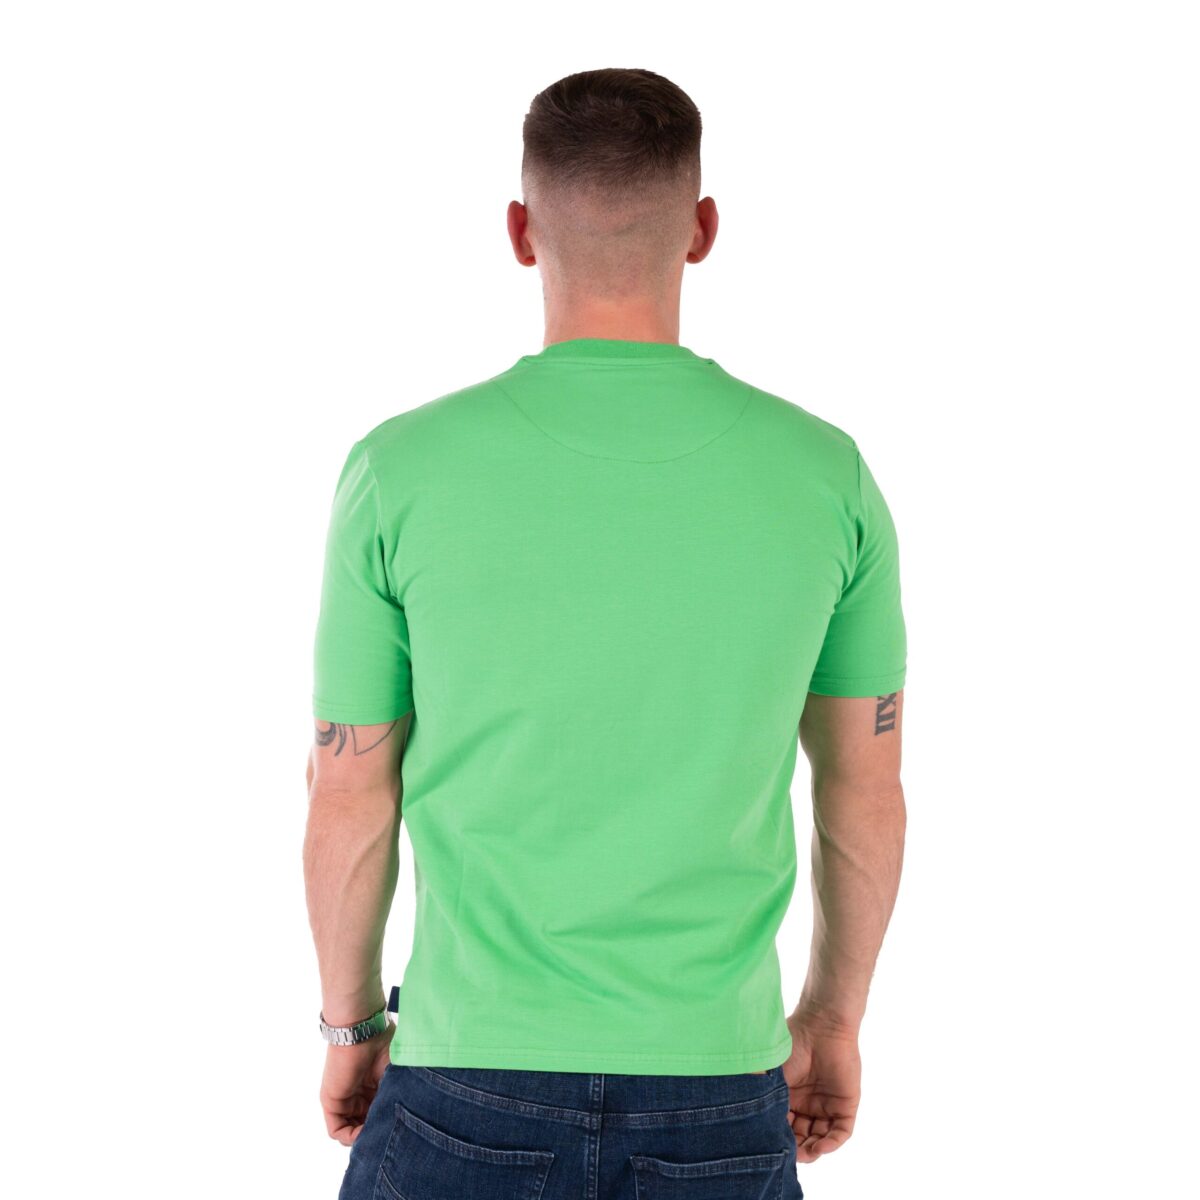 Rous Bright Green Stretch Tee